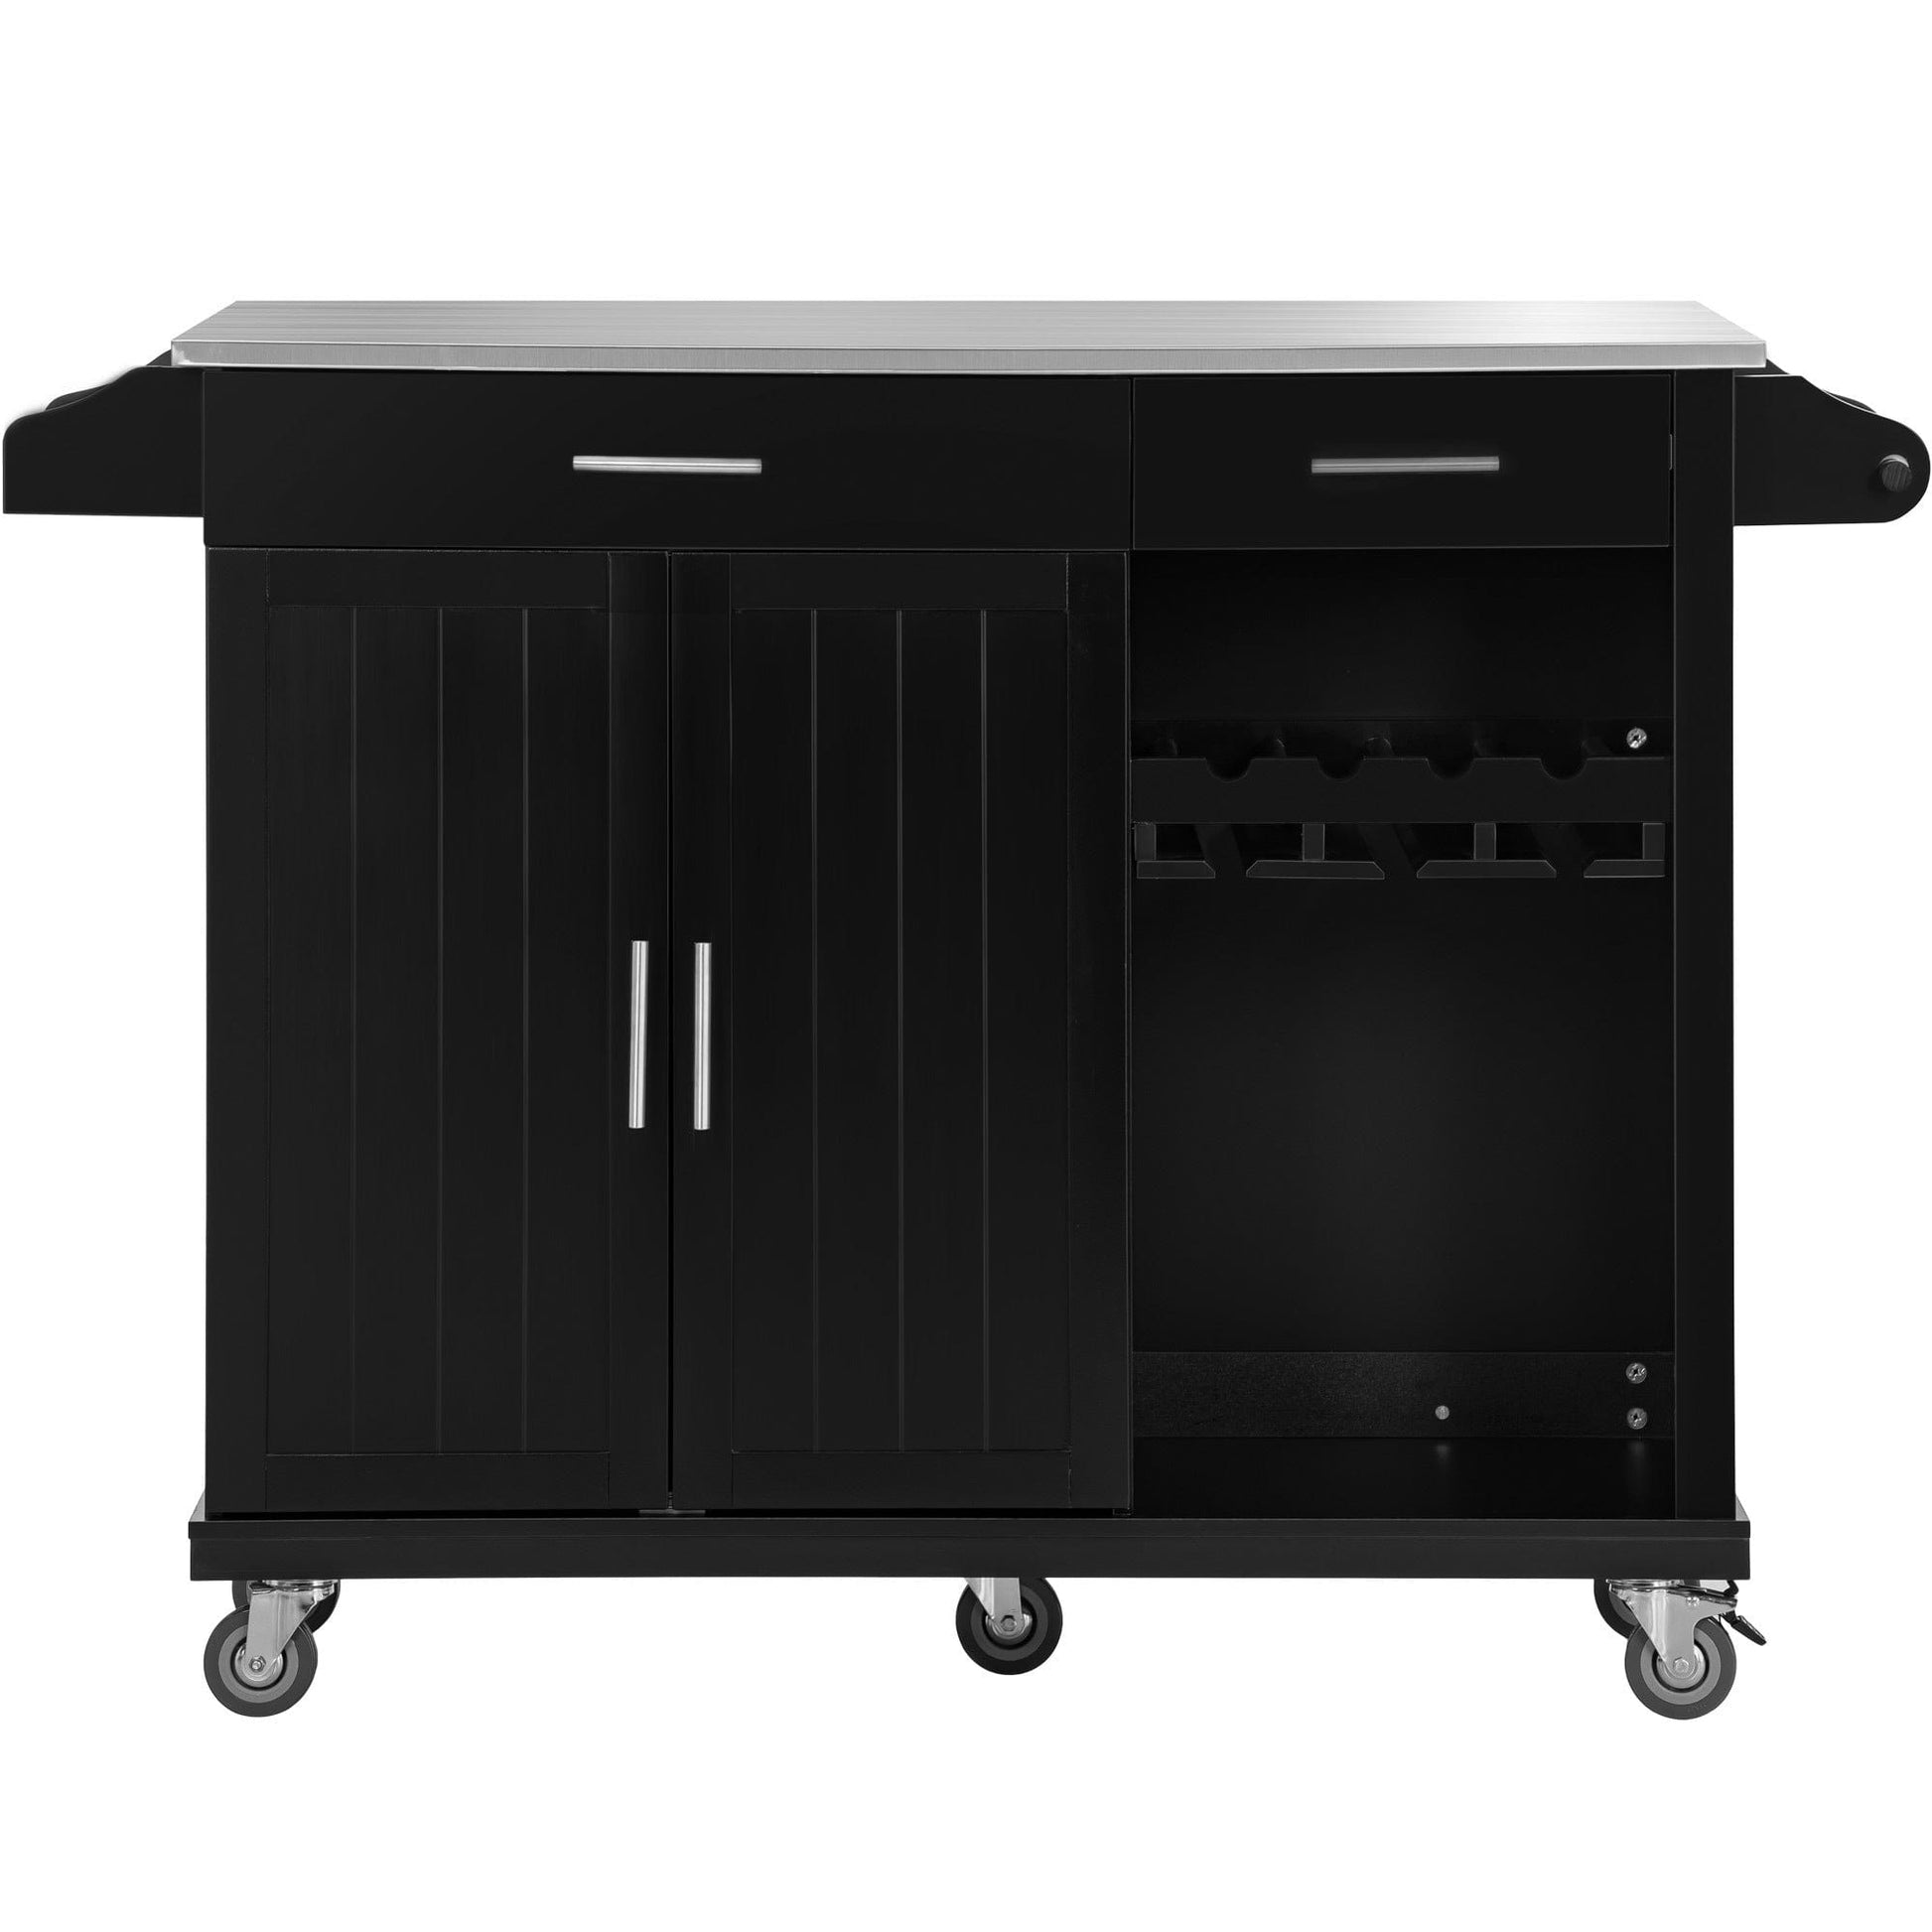 1st Choice Furniture Direct Kitchen Cart 1st Choice Stylish Functional Kitchen Cart with Wine Rack & Spice Rack